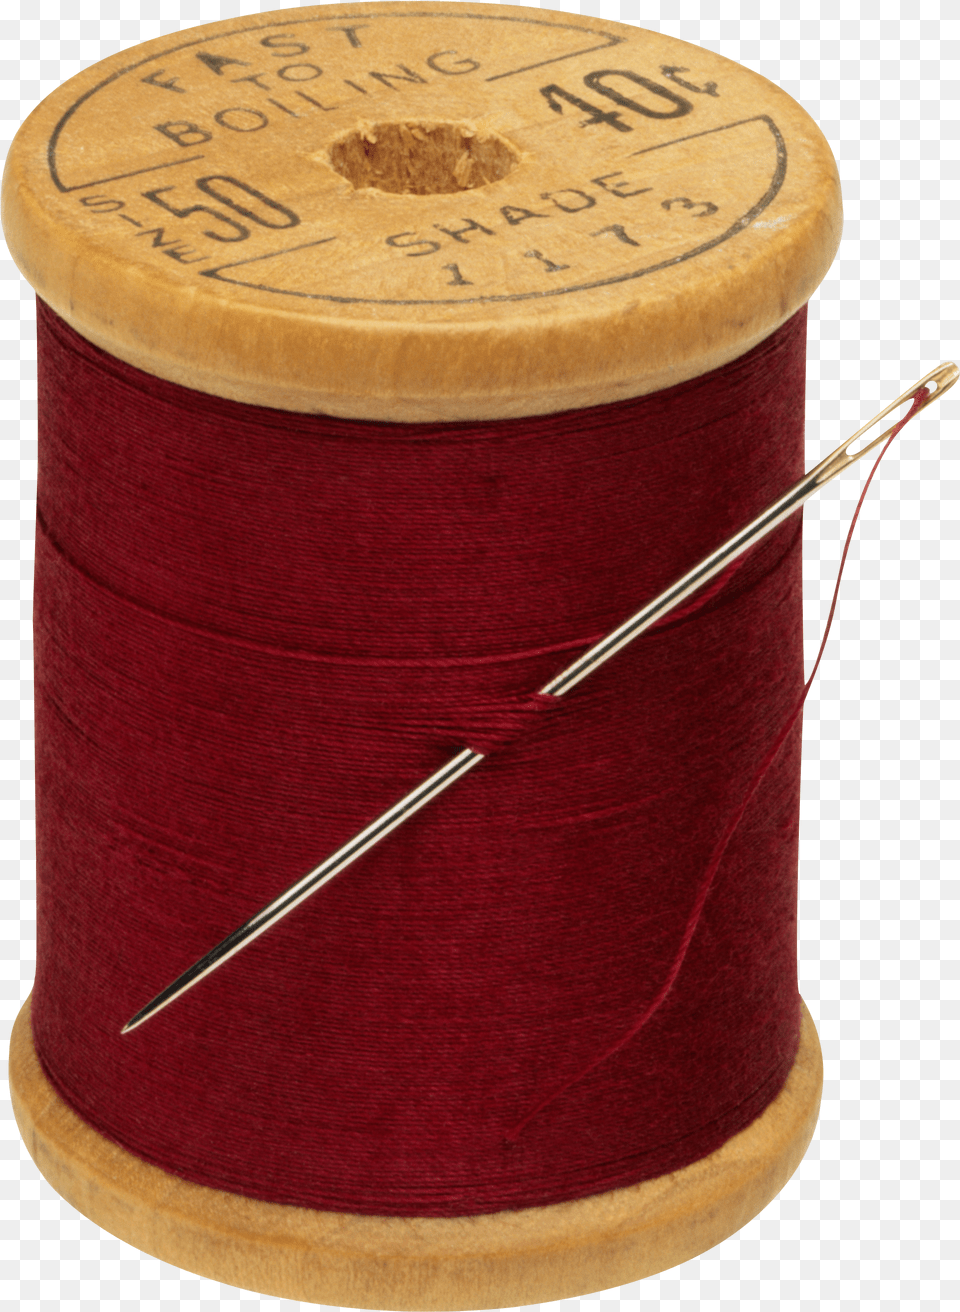 Thread And Needle Needle Spool Of Red Thread Png Image